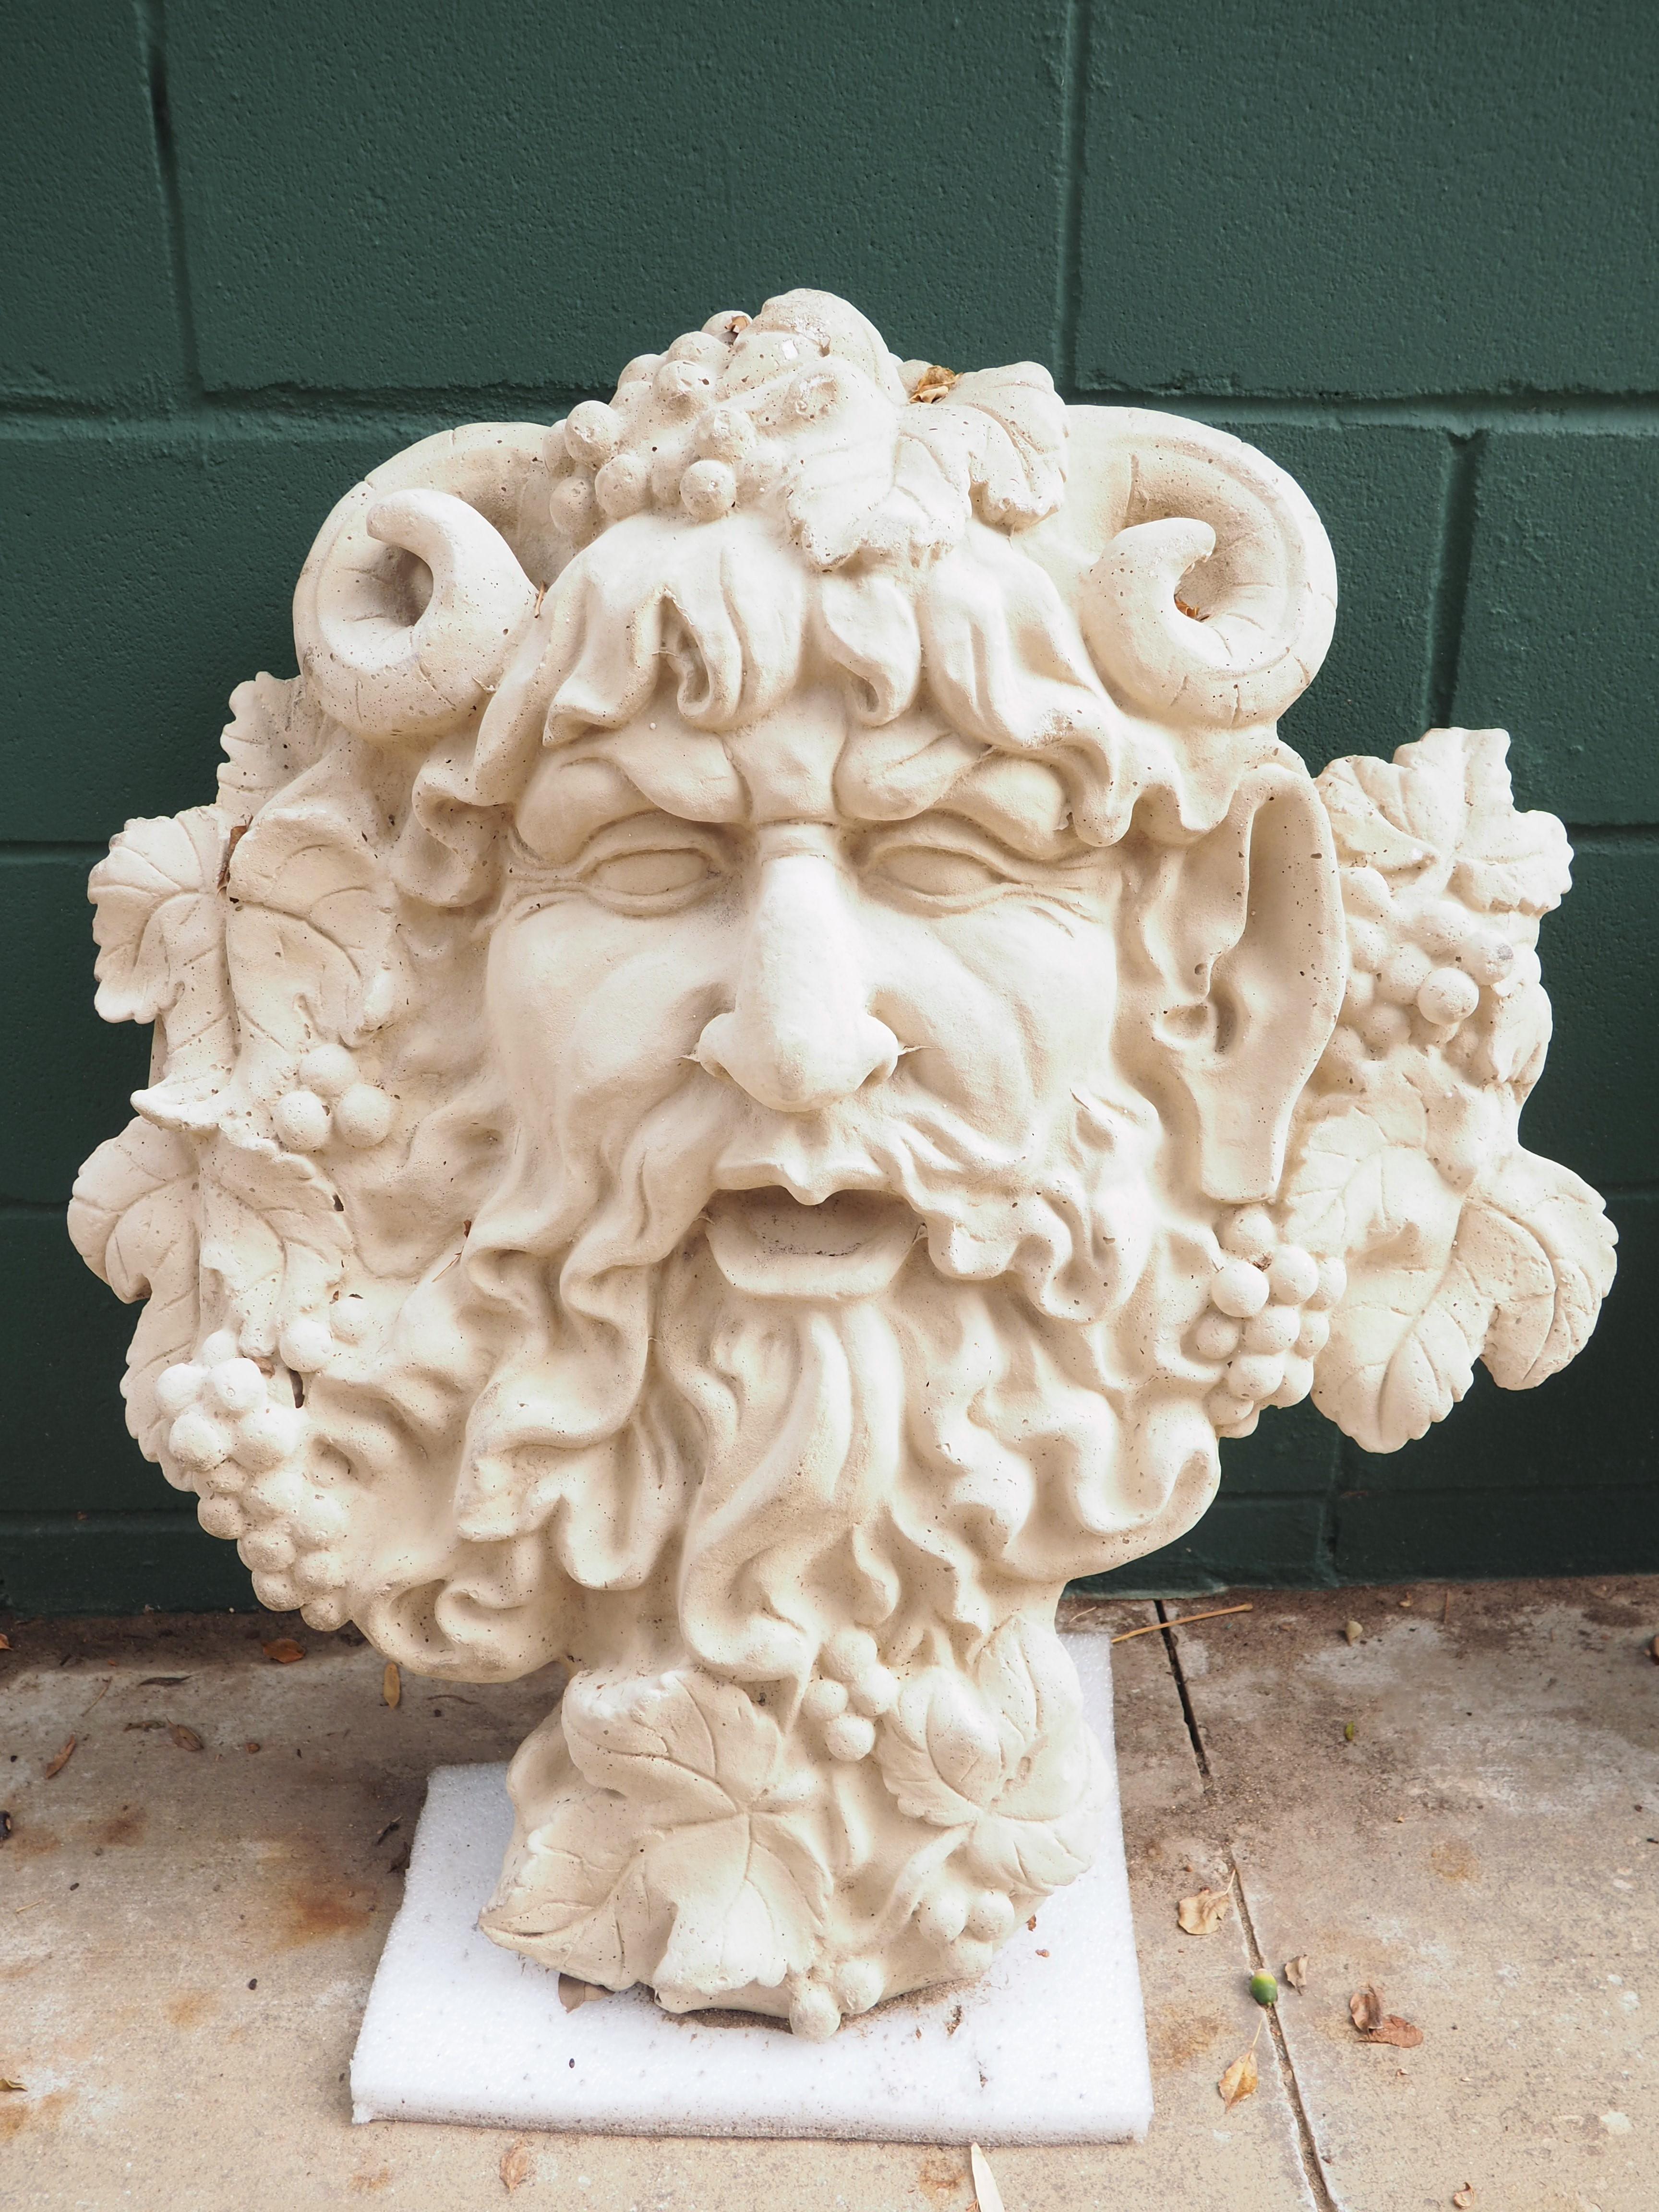 Cast in France, using a mixture of pulverized stone and cement, this large wall hanging of Bacchus, God of Wine, can also be used as a fountain spout. The stone and cement mixture, which is known as reconstituted stone, has also been mixed with a